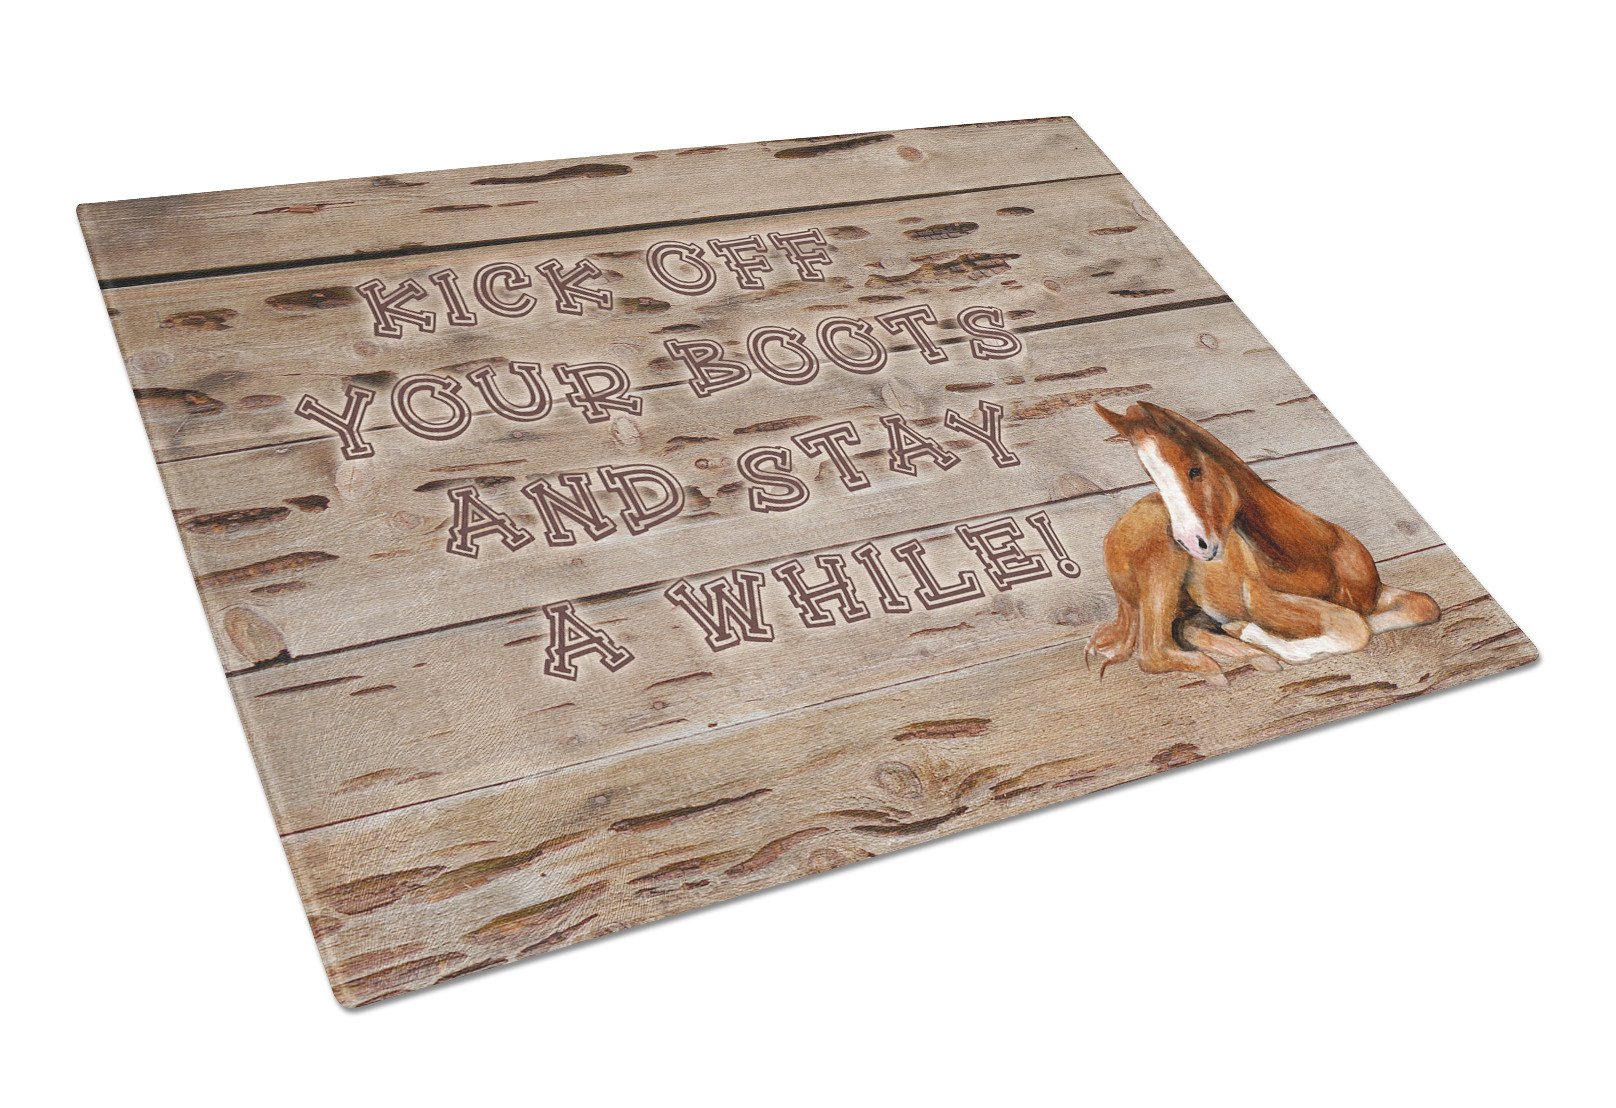 Kick off your boots and stay a while Glass Cutting Board Large Size SB3064LCB by Caroline's Treasures